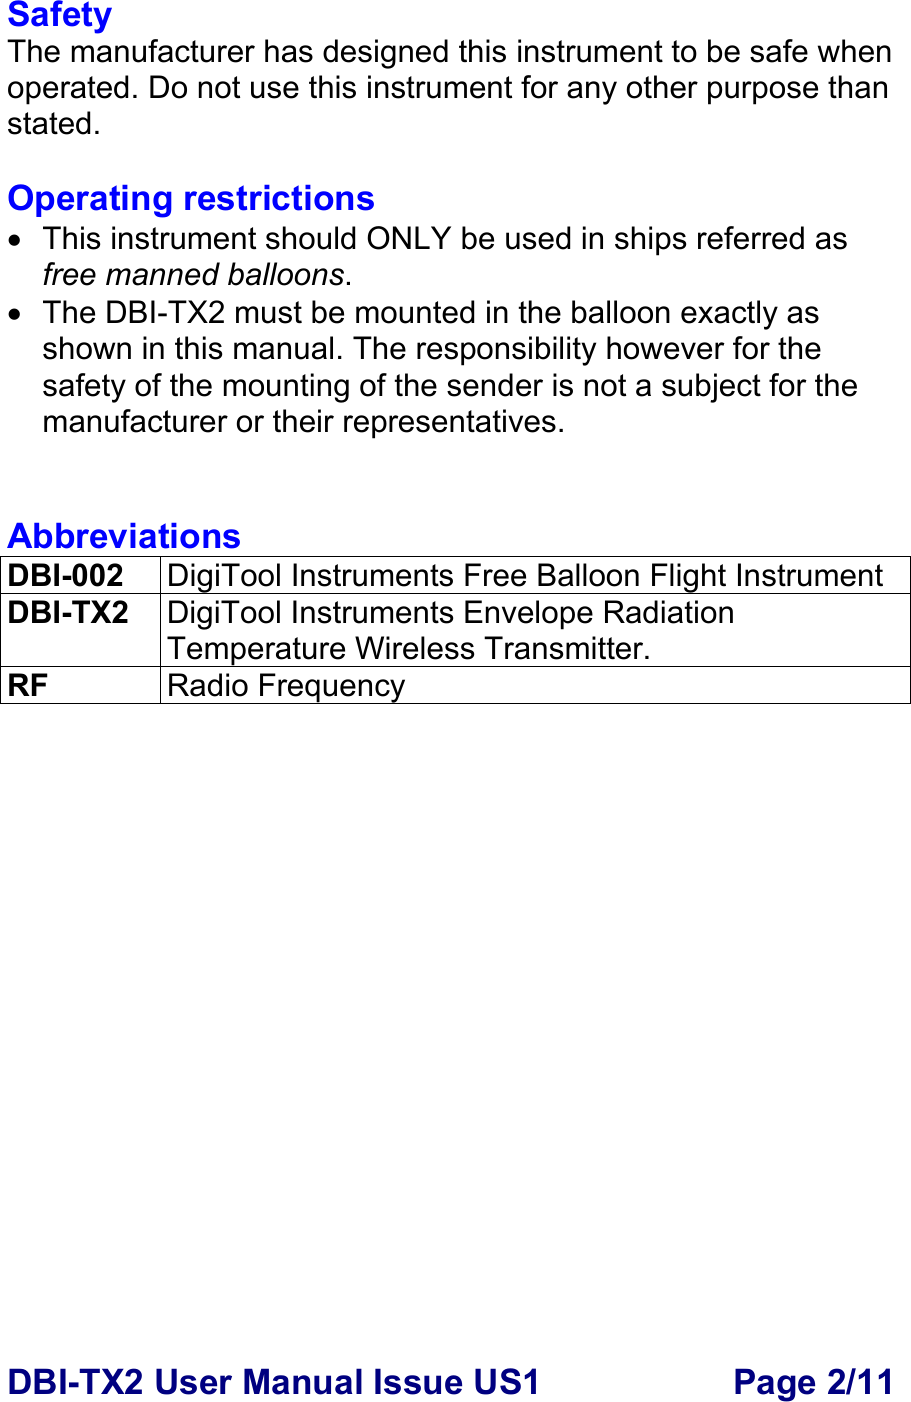 DBI-TX2 User Manual Issue US1  Page 2/11 Safety The manufacturer has designed this instrument to be safe when operated. Do not use this instrument for any other purpose than stated.  Operating restrictions •  This instrument should ONLY be used in ships referred as free manned balloons. •  The DBI-TX2 must be mounted in the balloon exactly as shown in this manual. The responsibility however for the safety of the mounting of the sender is not a subject for the manufacturer or their representatives.   Abbreviations DBI-002  DigiTool Instruments Free Balloon Flight Instrument DBI-TX2  DigiTool Instruments Envelope Radiation Temperature Wireless Transmitter. RF  Radio Frequency  